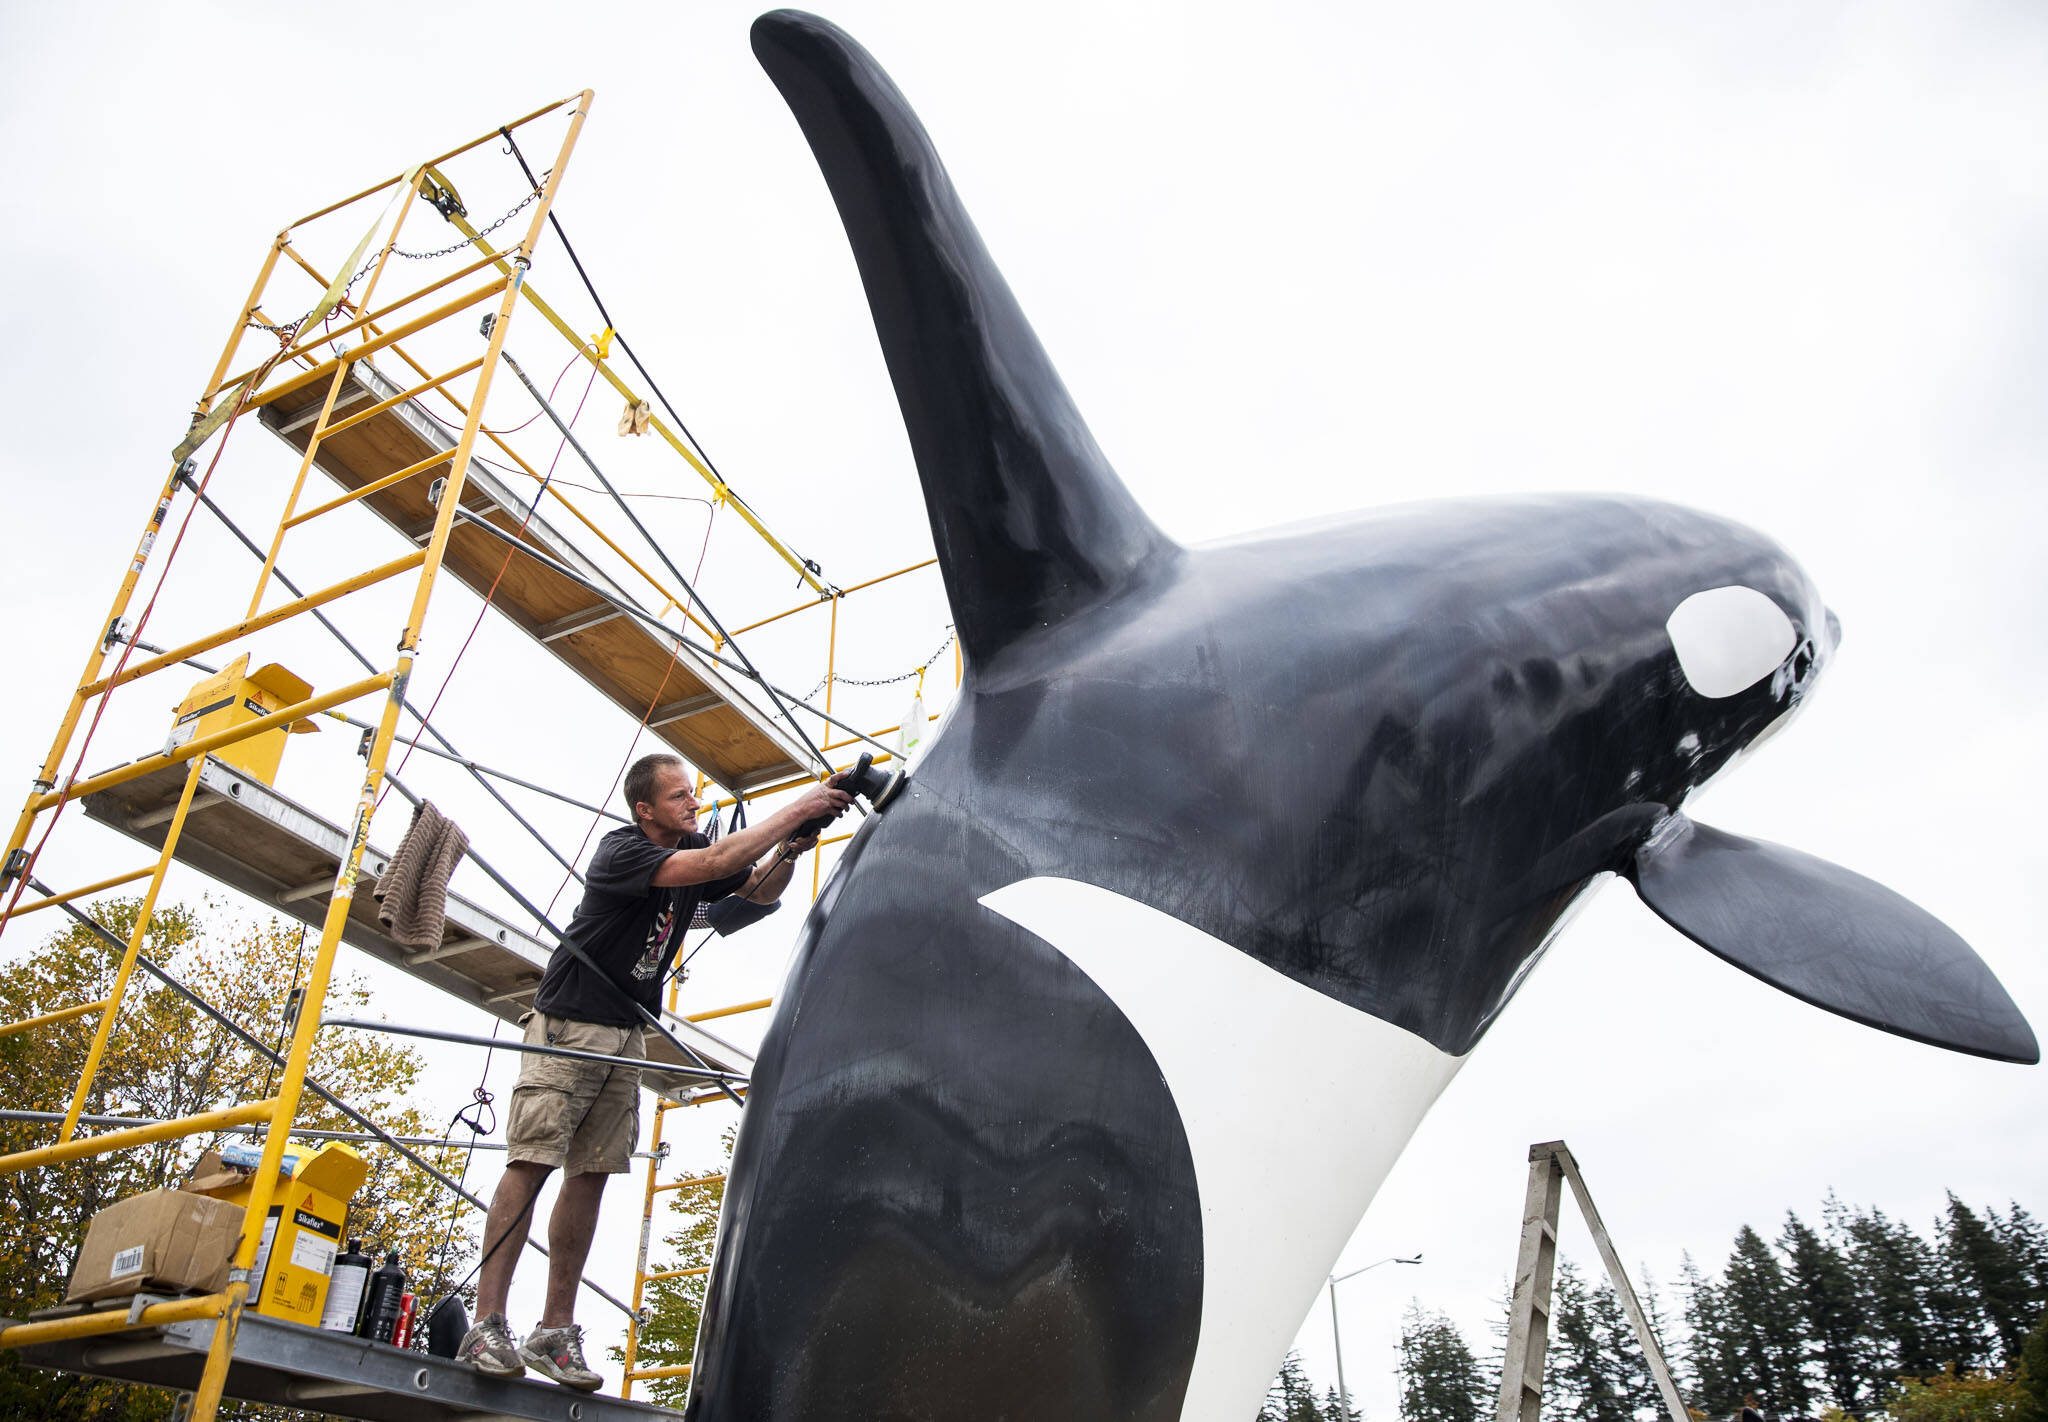 Dana Foy, of AAA Super Clean, buffs a life-size orca fixture in one of the Tulalip Resort and Casino fountains on Sept. 22, in Tulalip. (Olivia Vanni / The Herald)